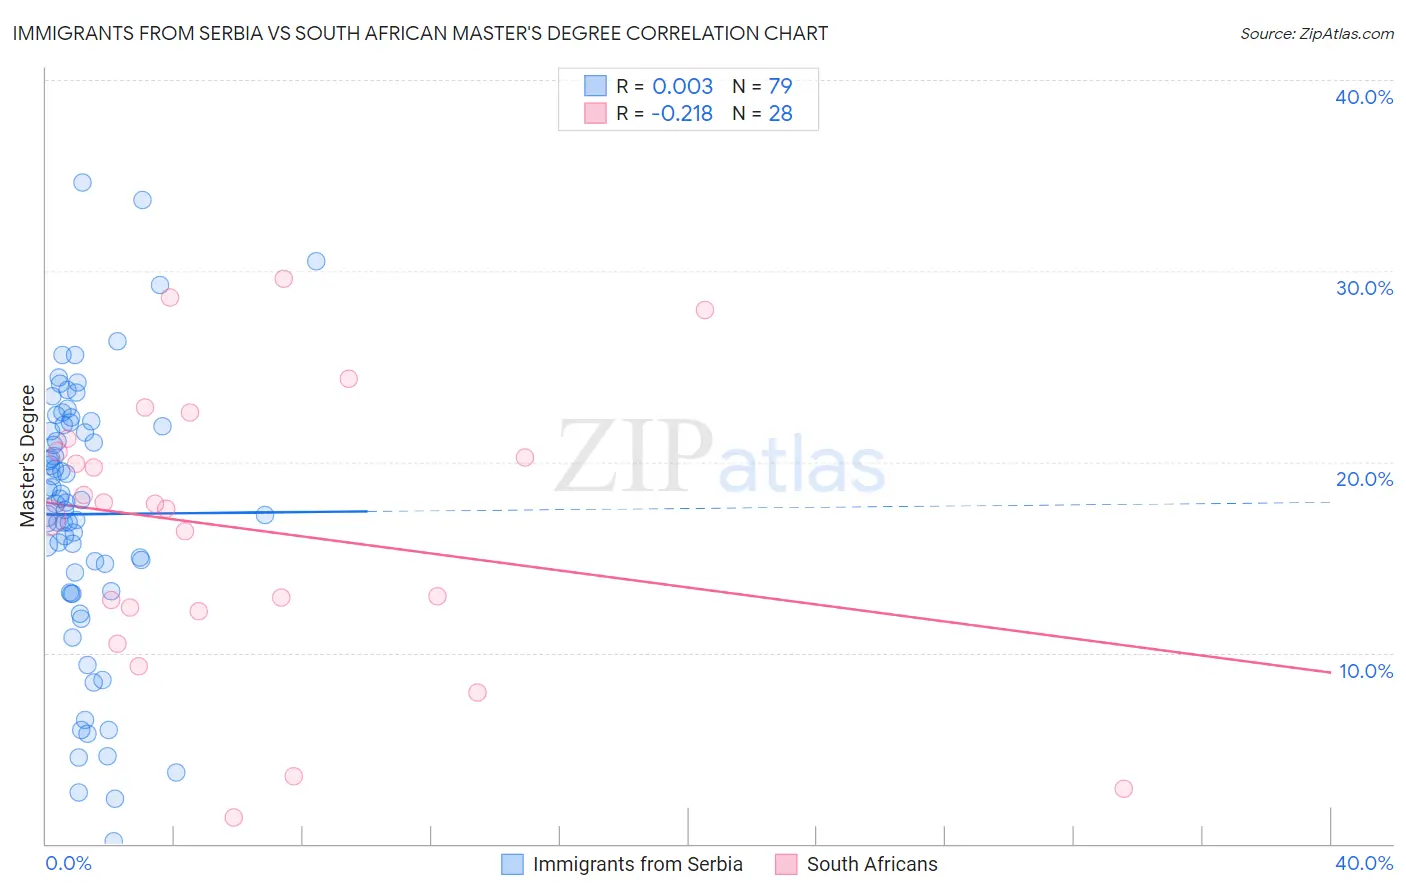 Immigrants from Serbia vs South African Master's Degree